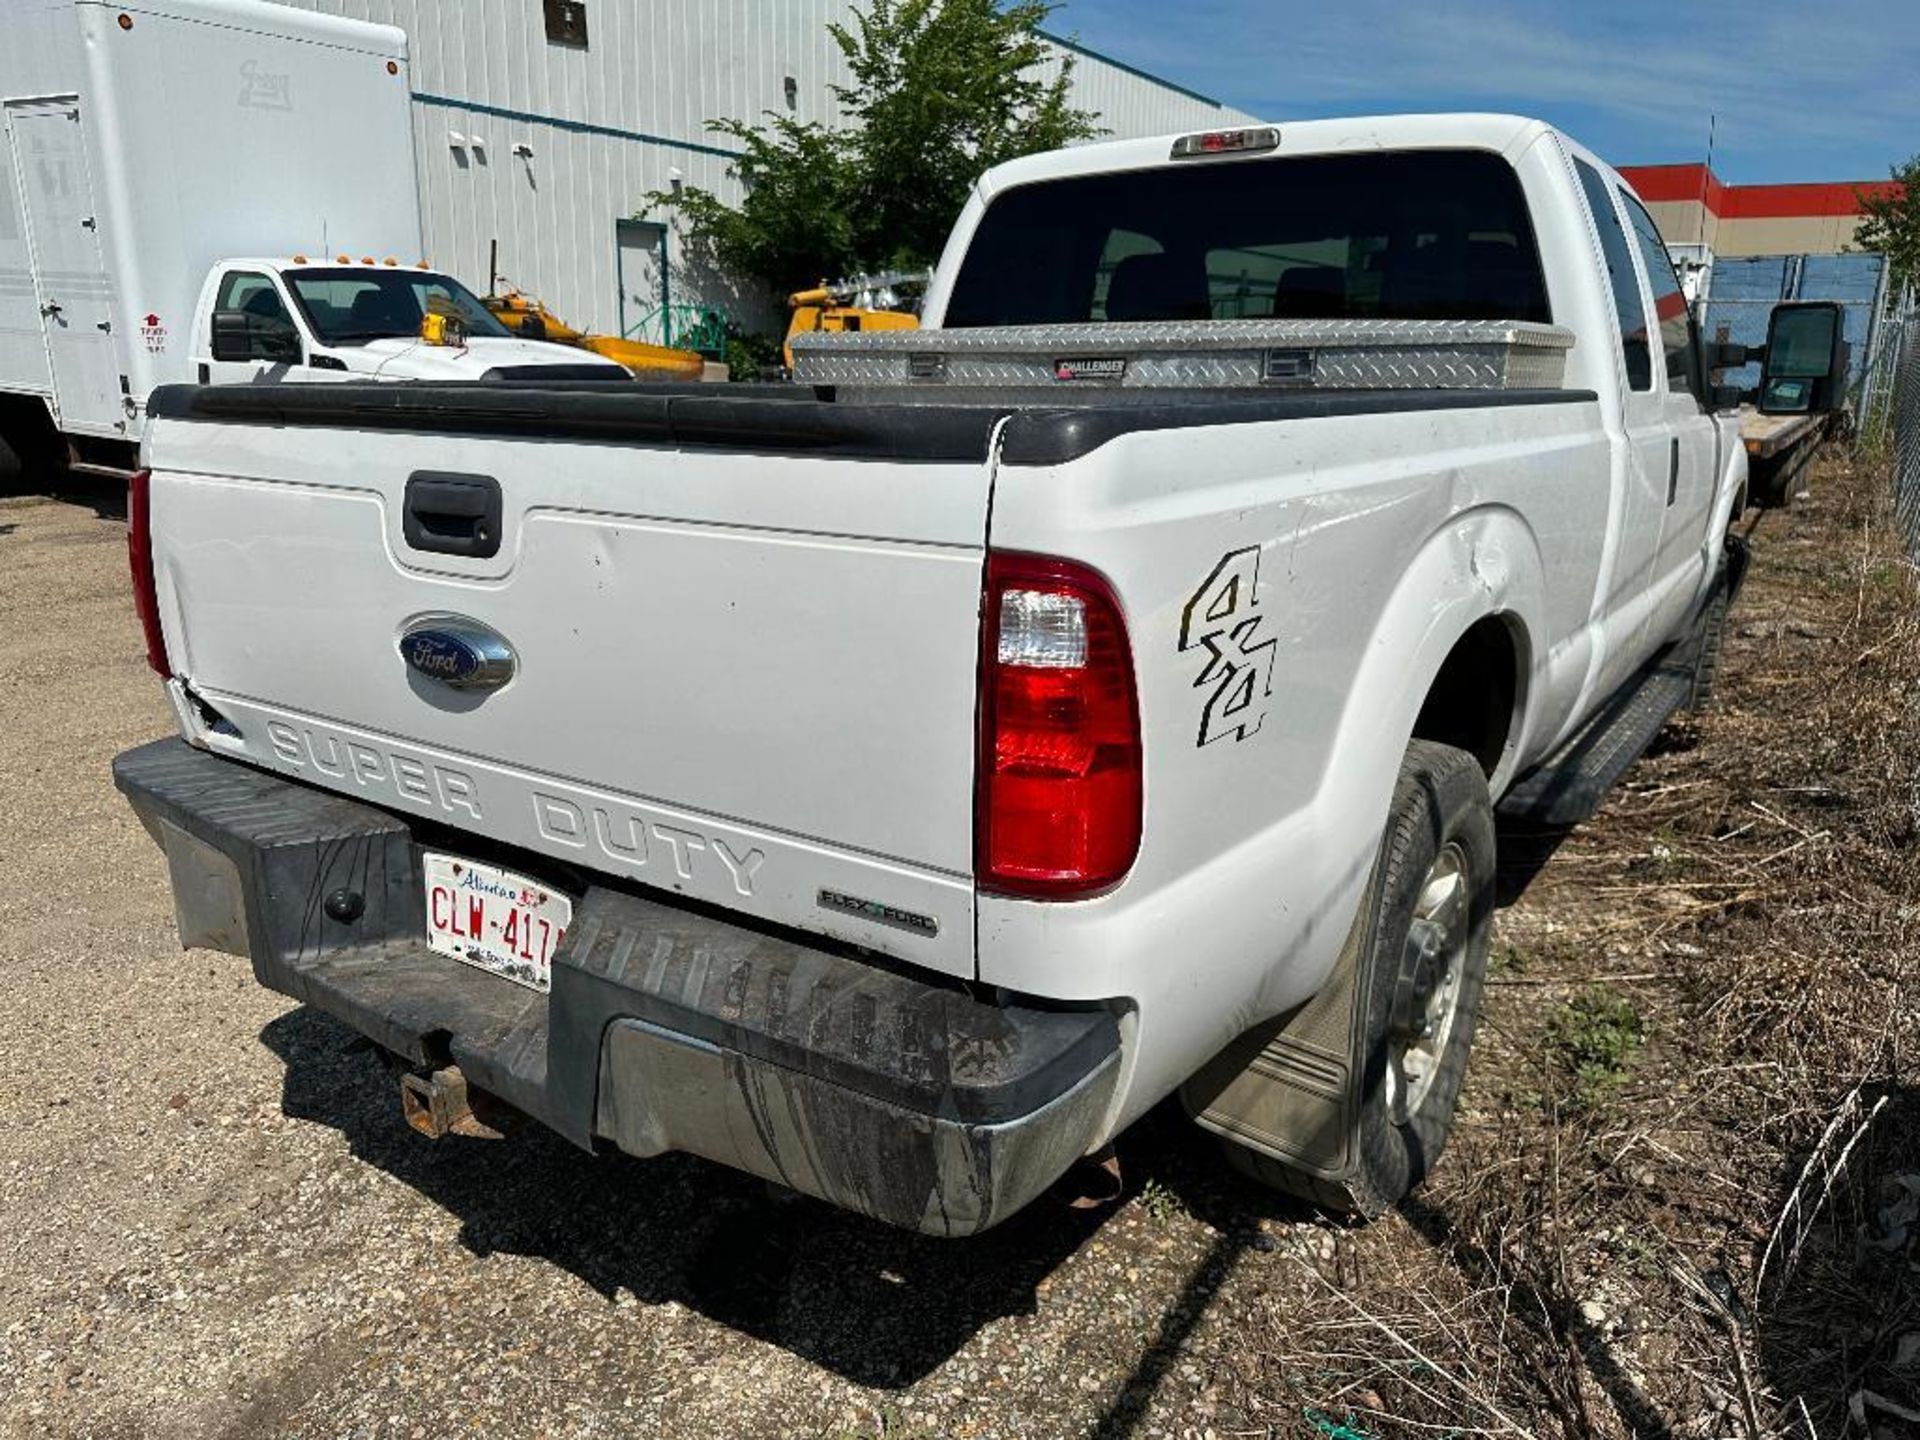 2015 Ford F-250 XLT Ext. Cab Pickup Truck, 238,245 kms Showing, VIN: 1FT7X2B67FEC06435 - Image 4 of 11